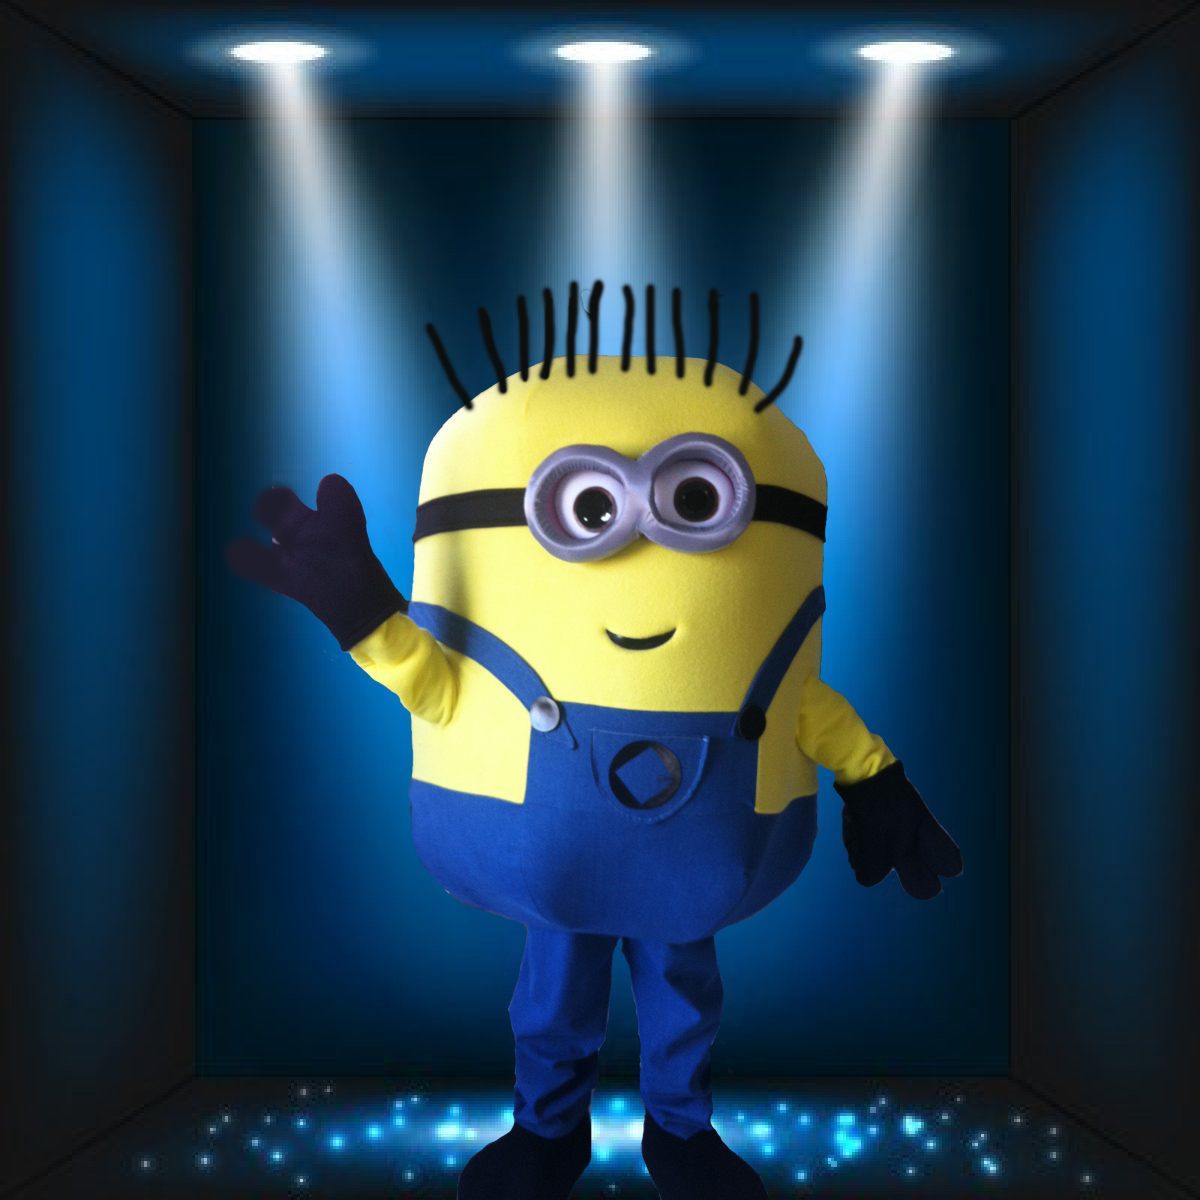 Rent_Minions_Despicable_Me_kid's_birthday_party_characters_online[1]